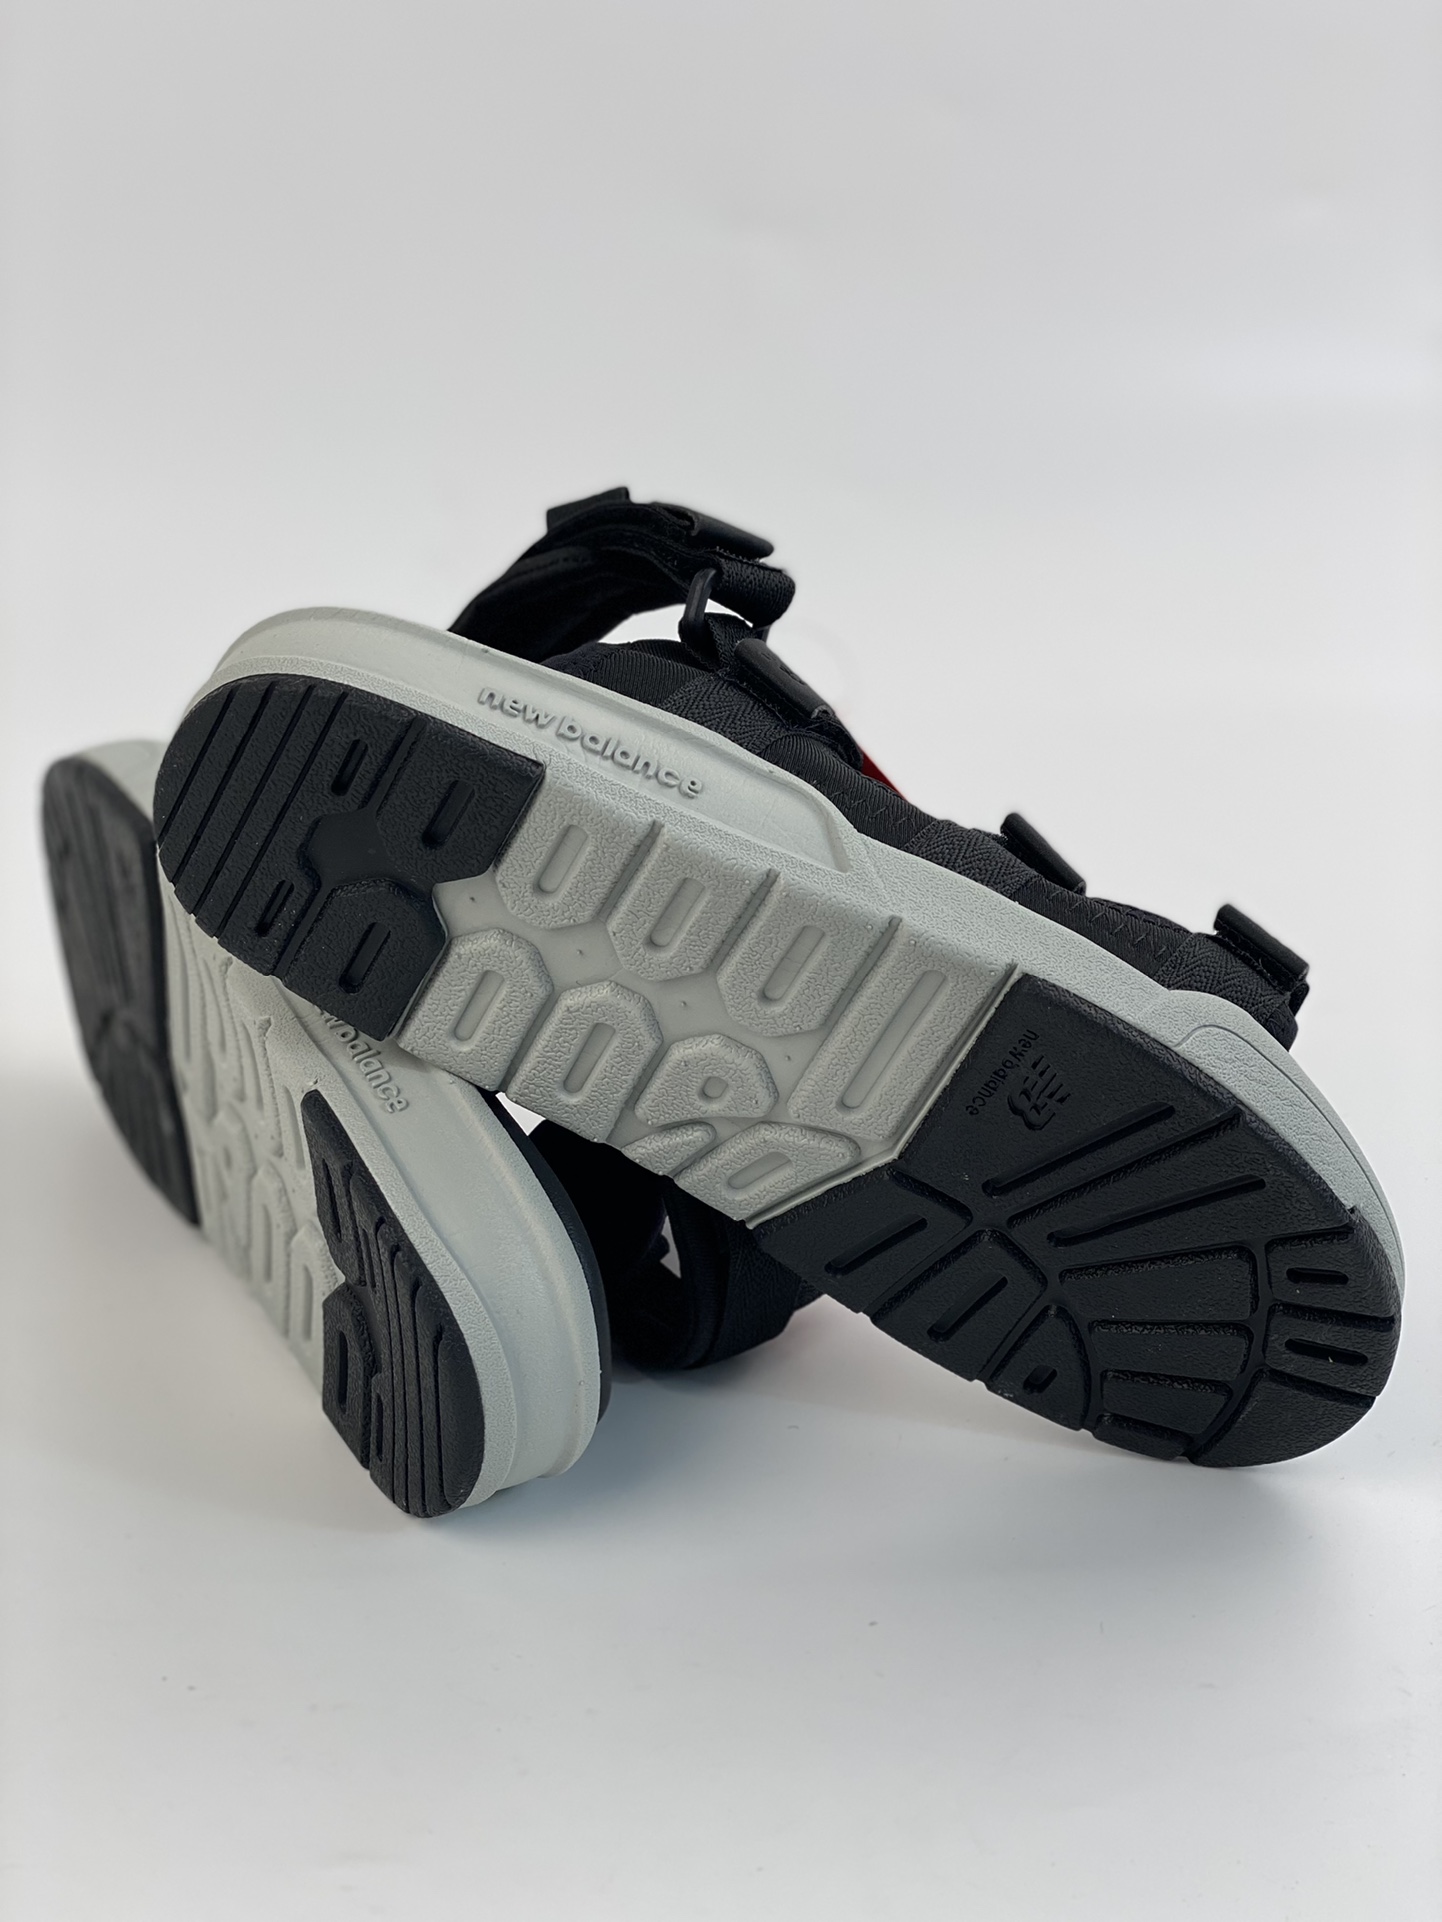 New Balance NB sandals casual shoes for men and women